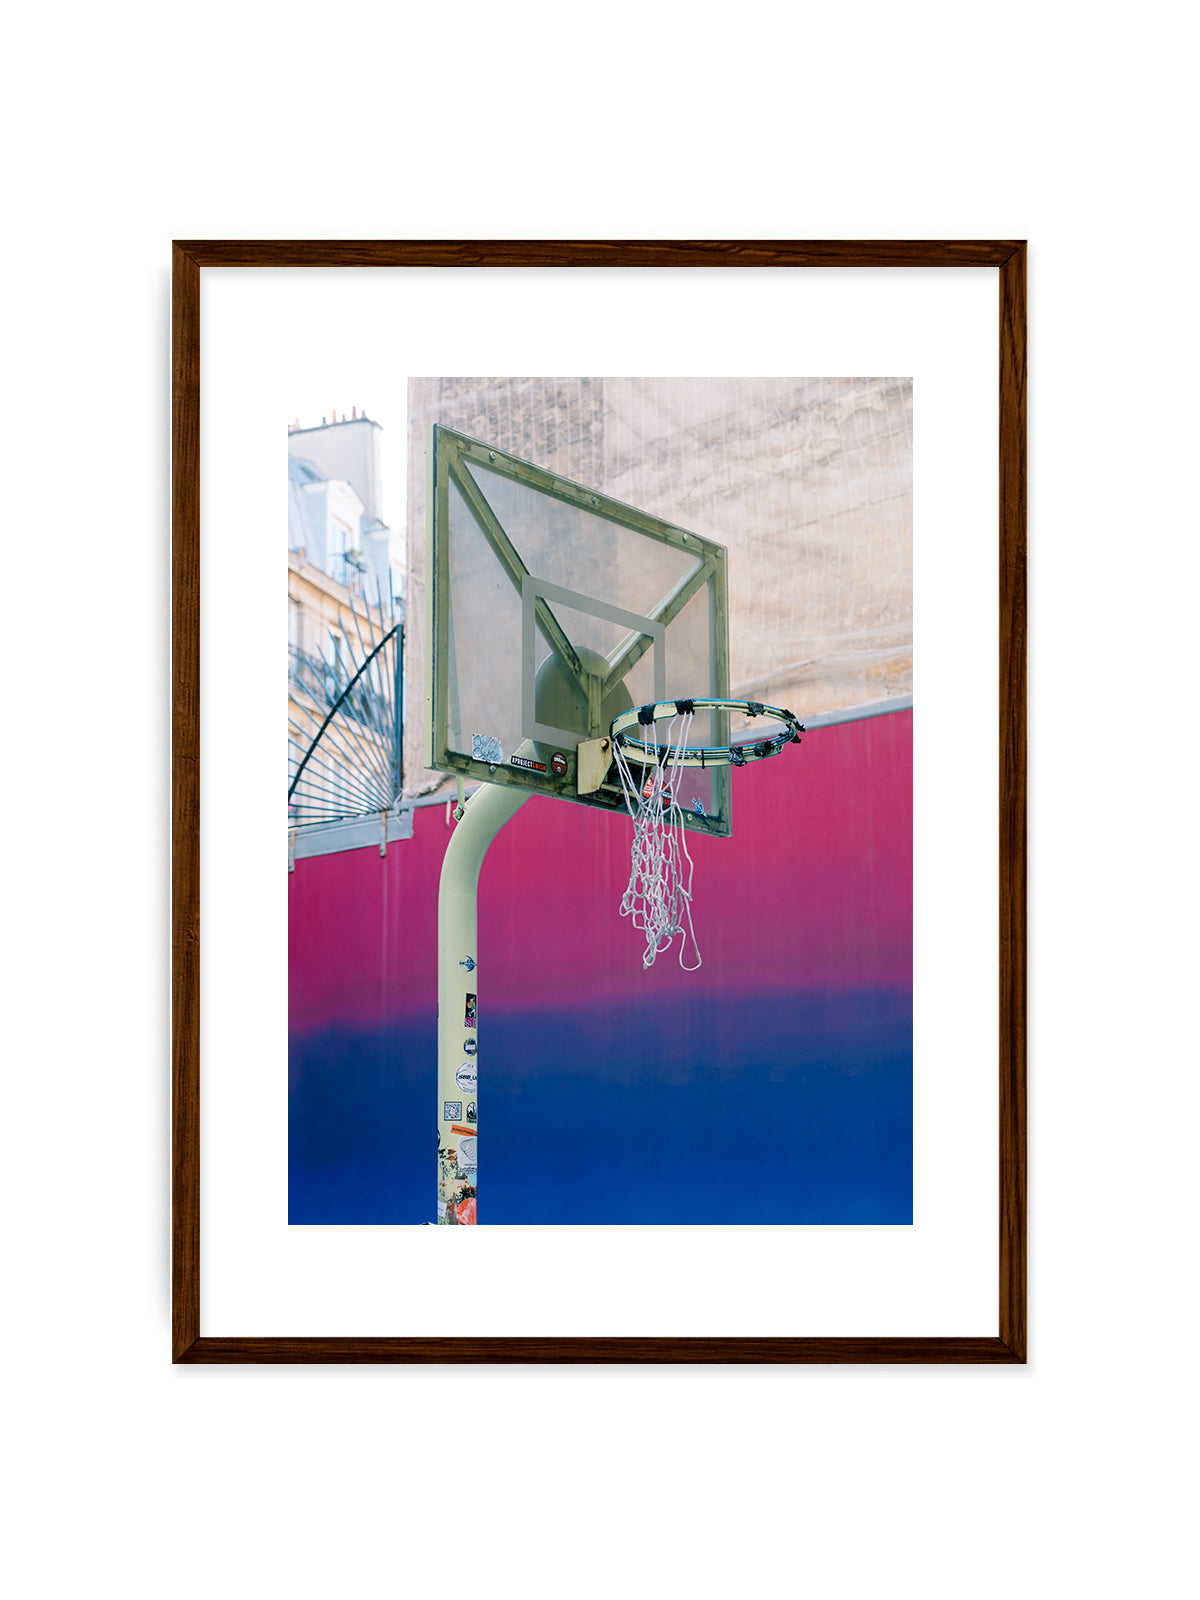 PIGALLE BASKETBALL COURT #3